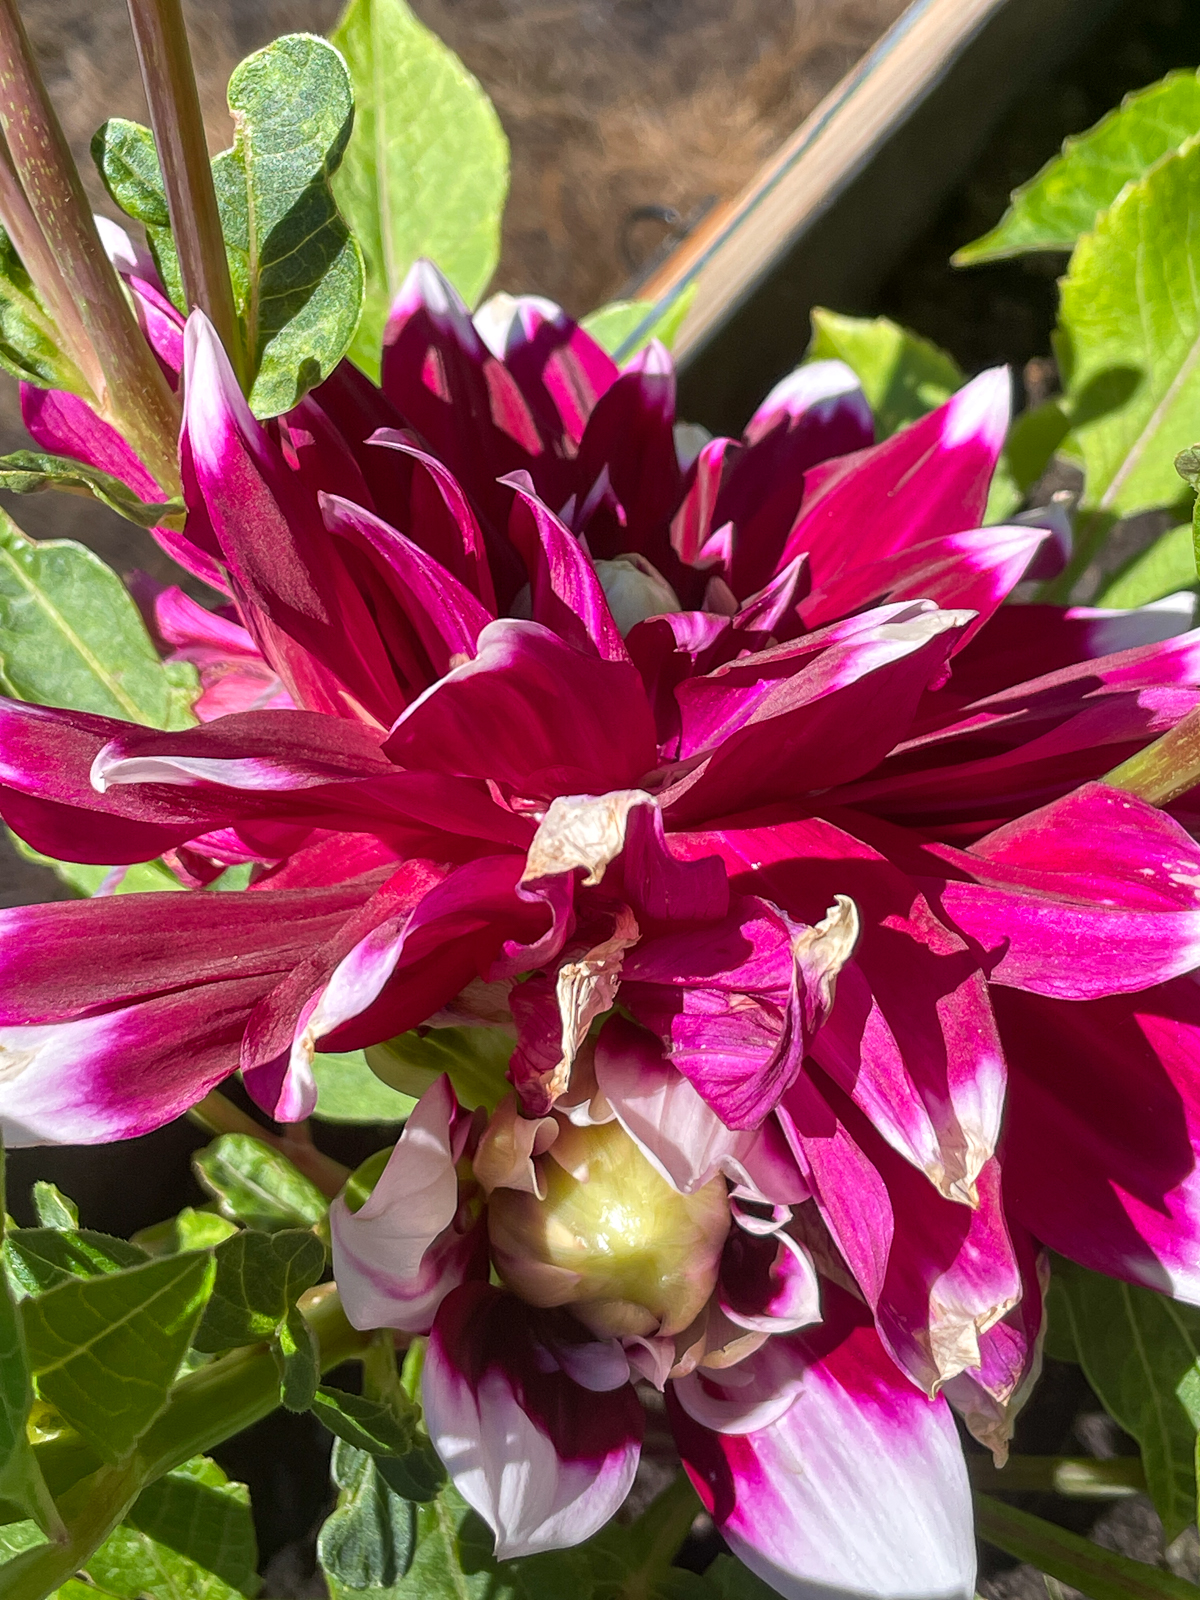 two Mystery Day dahlia flowers blooming too close together on the same stem because it wasn't disbudded